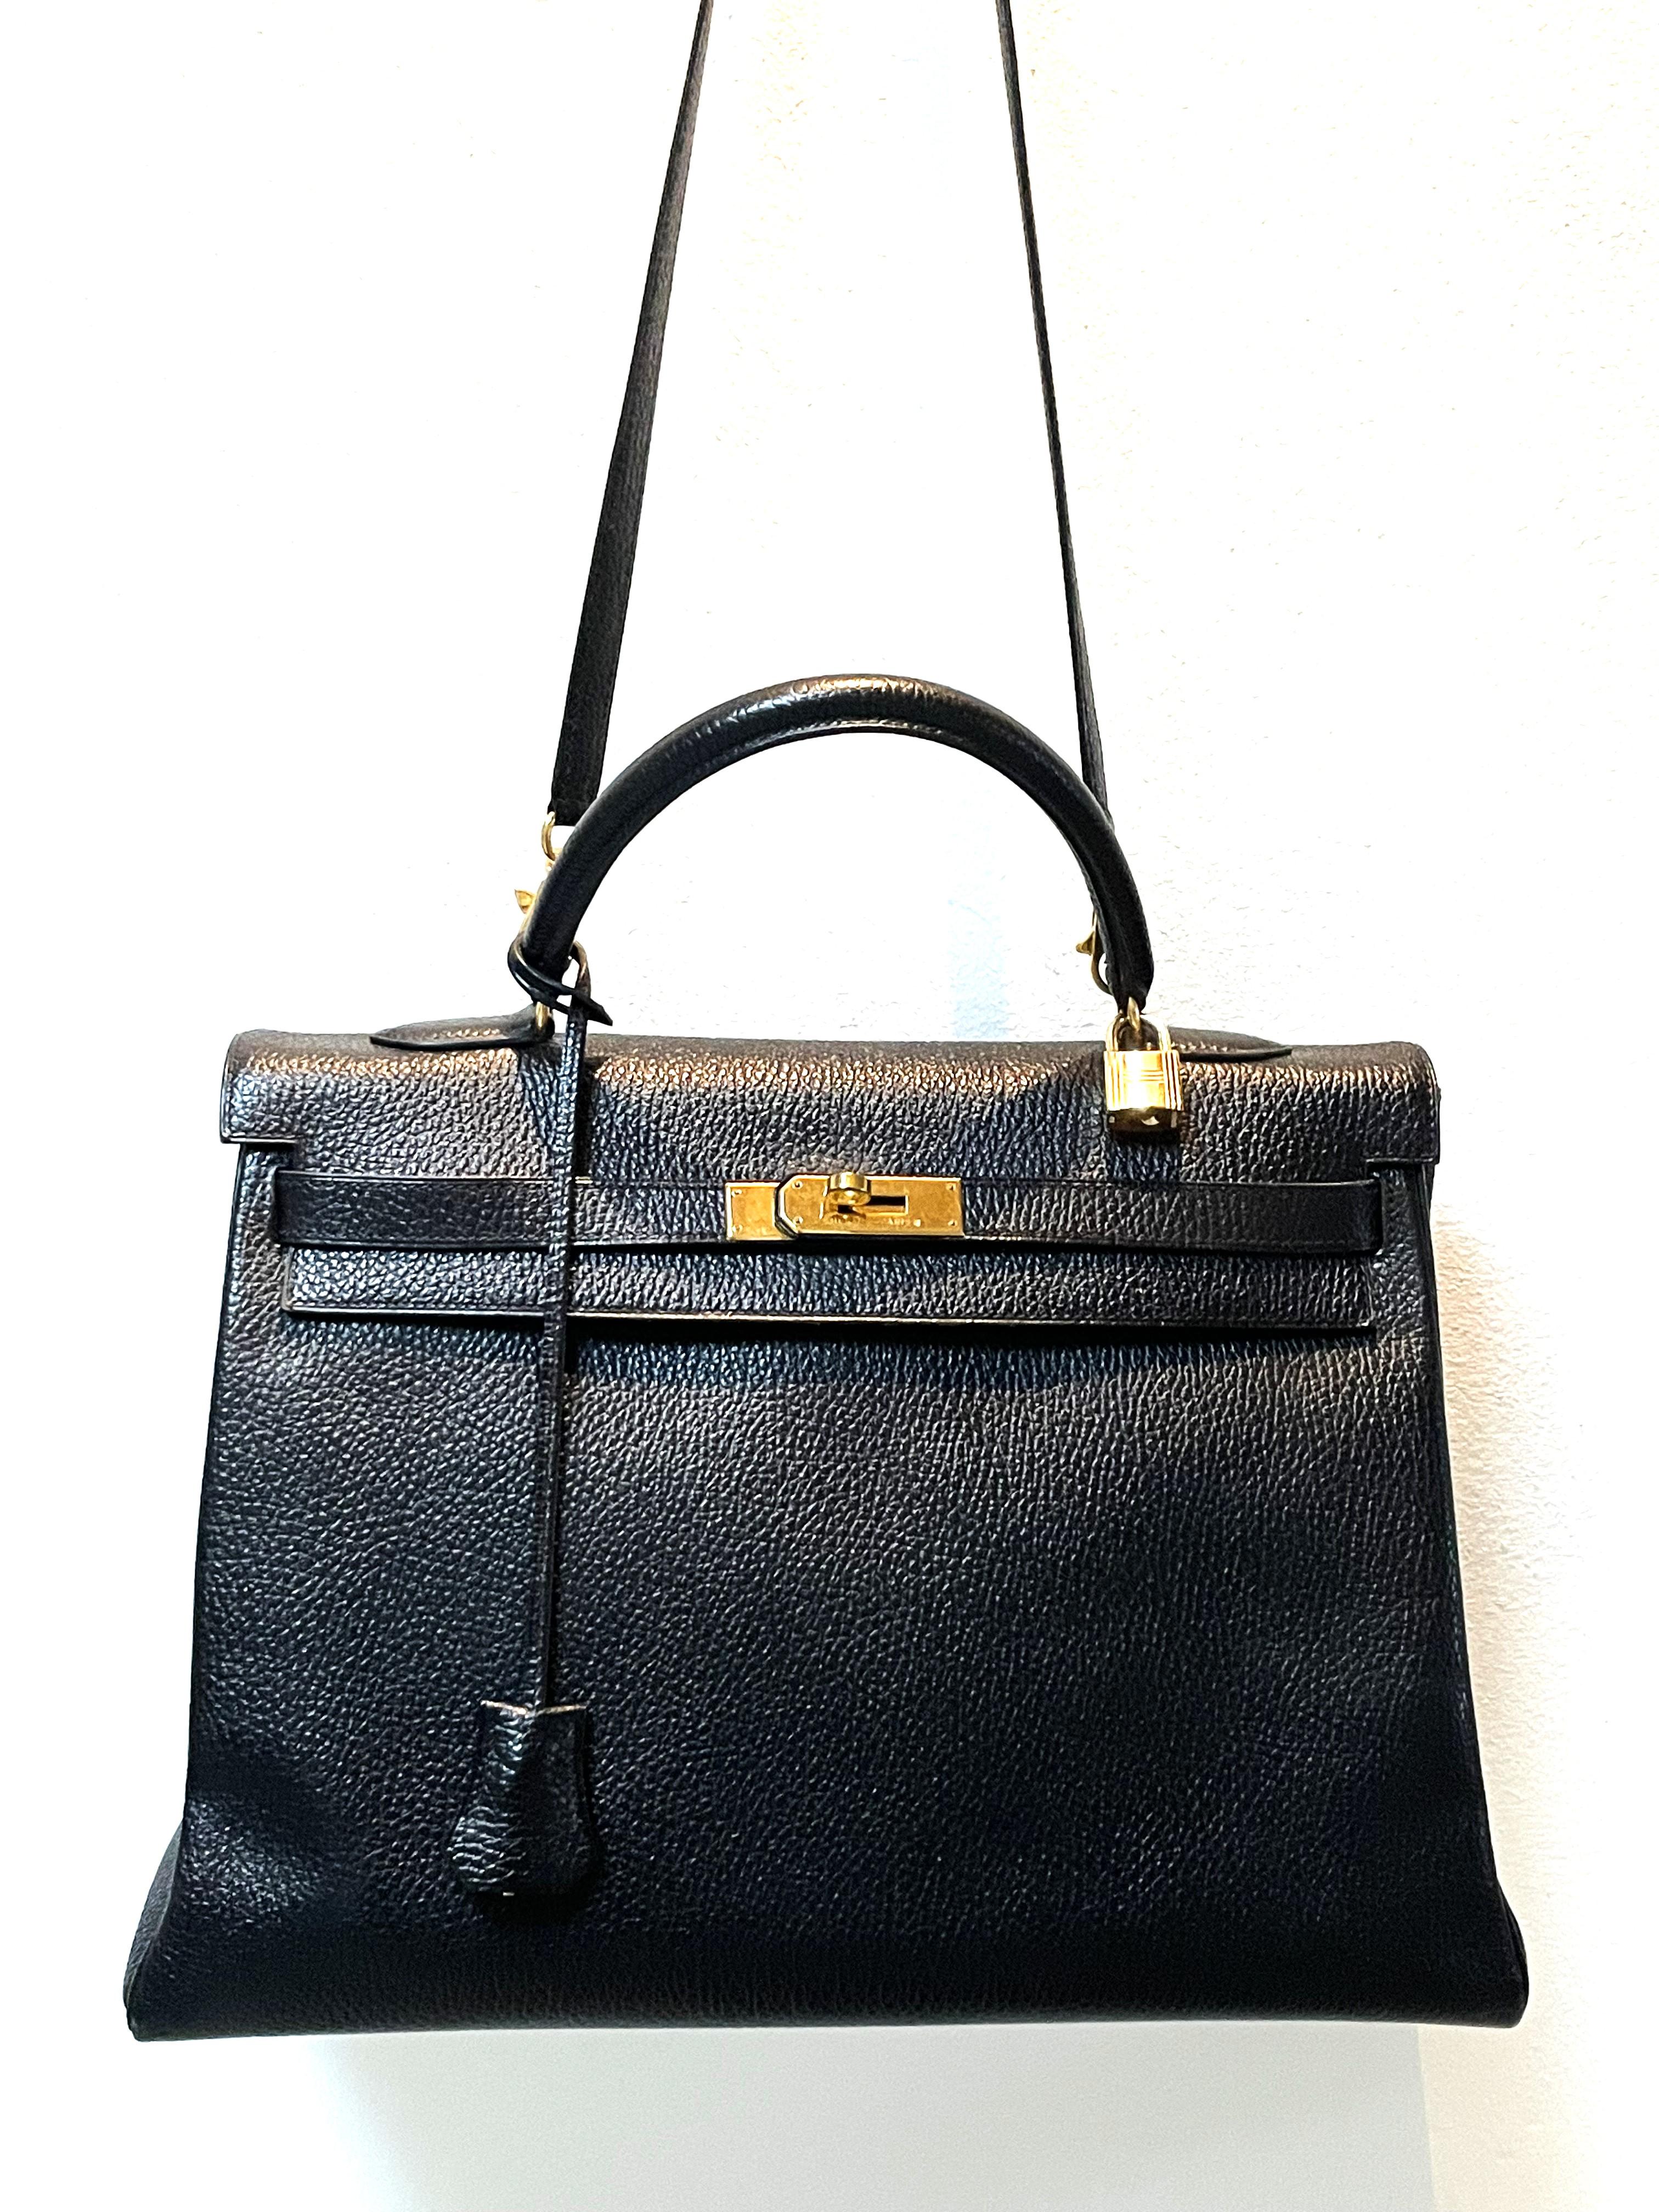 Hermes Kelly Bag 35 cm, 2 way,  Chevre leather in black, a very insensitve leather,  marked with B  - 1998  the square . 
Very good condition - no damaged edges. 

Measurement
Width of the bag 35 xm
Height of the bag 25 cm
Depth of the bag 13